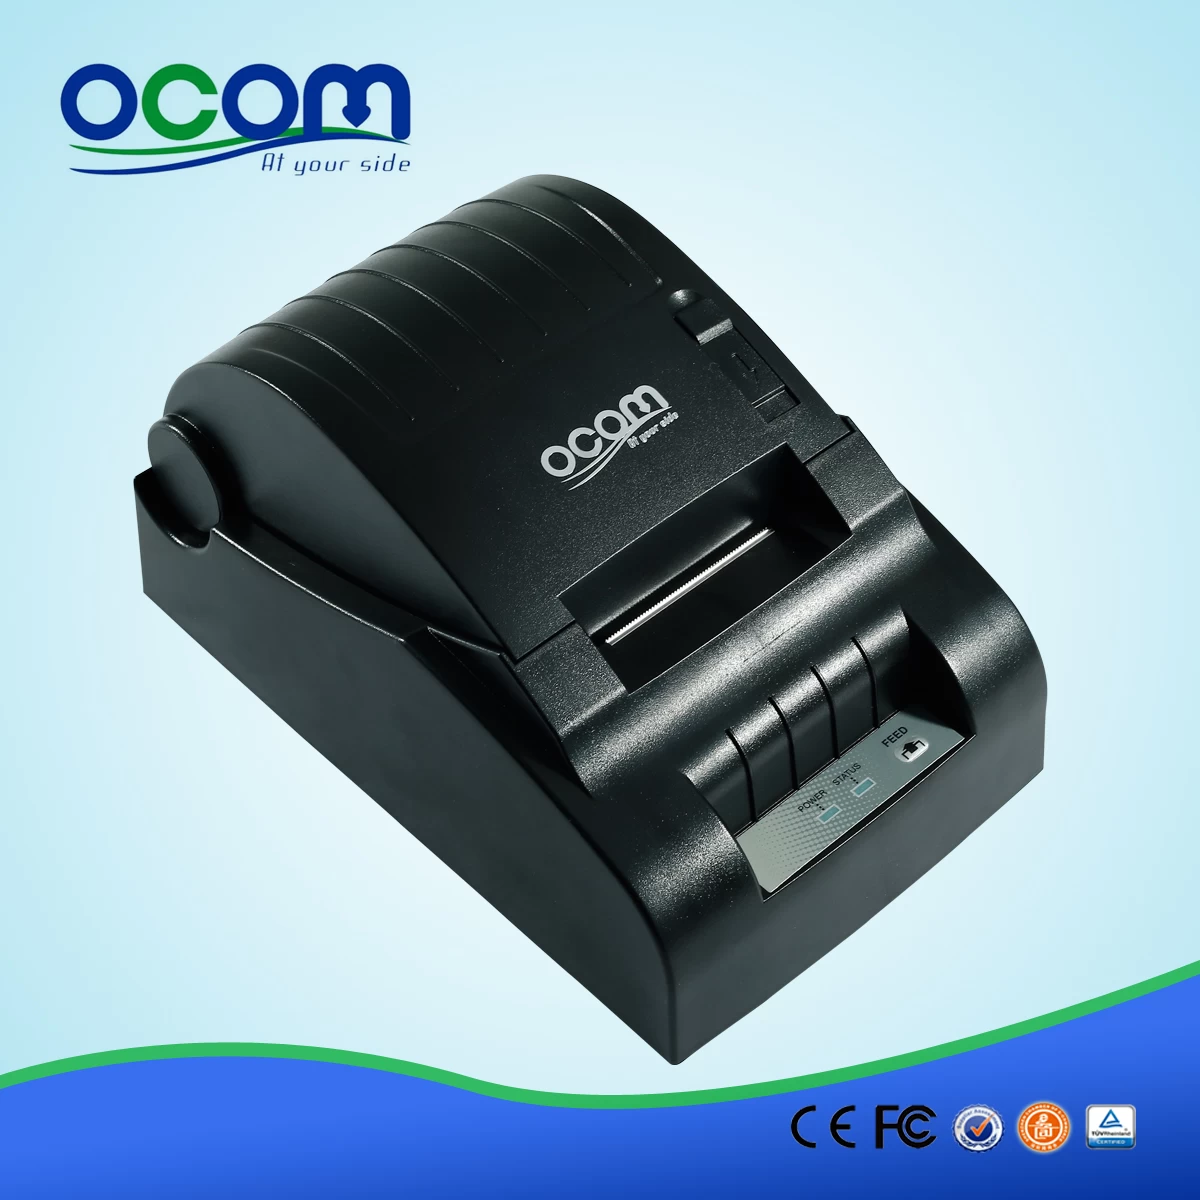 Pos thermal receipt printer rp58 with high speed  (OCPP-582)